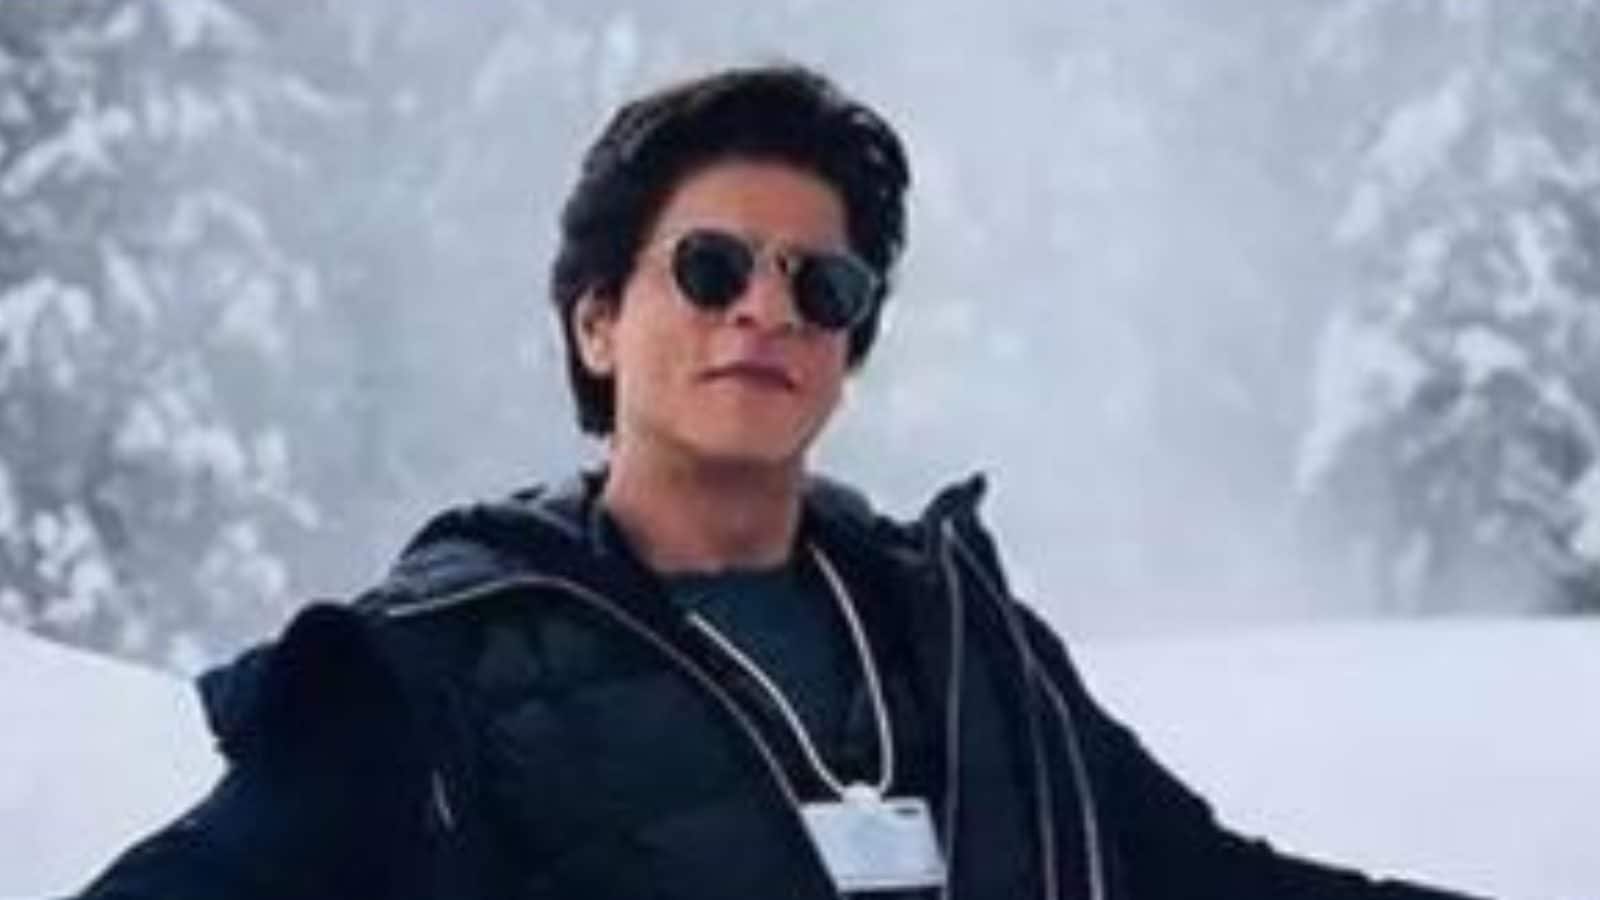 Shah Rukh Khan is back with his Signature Romantic Pose